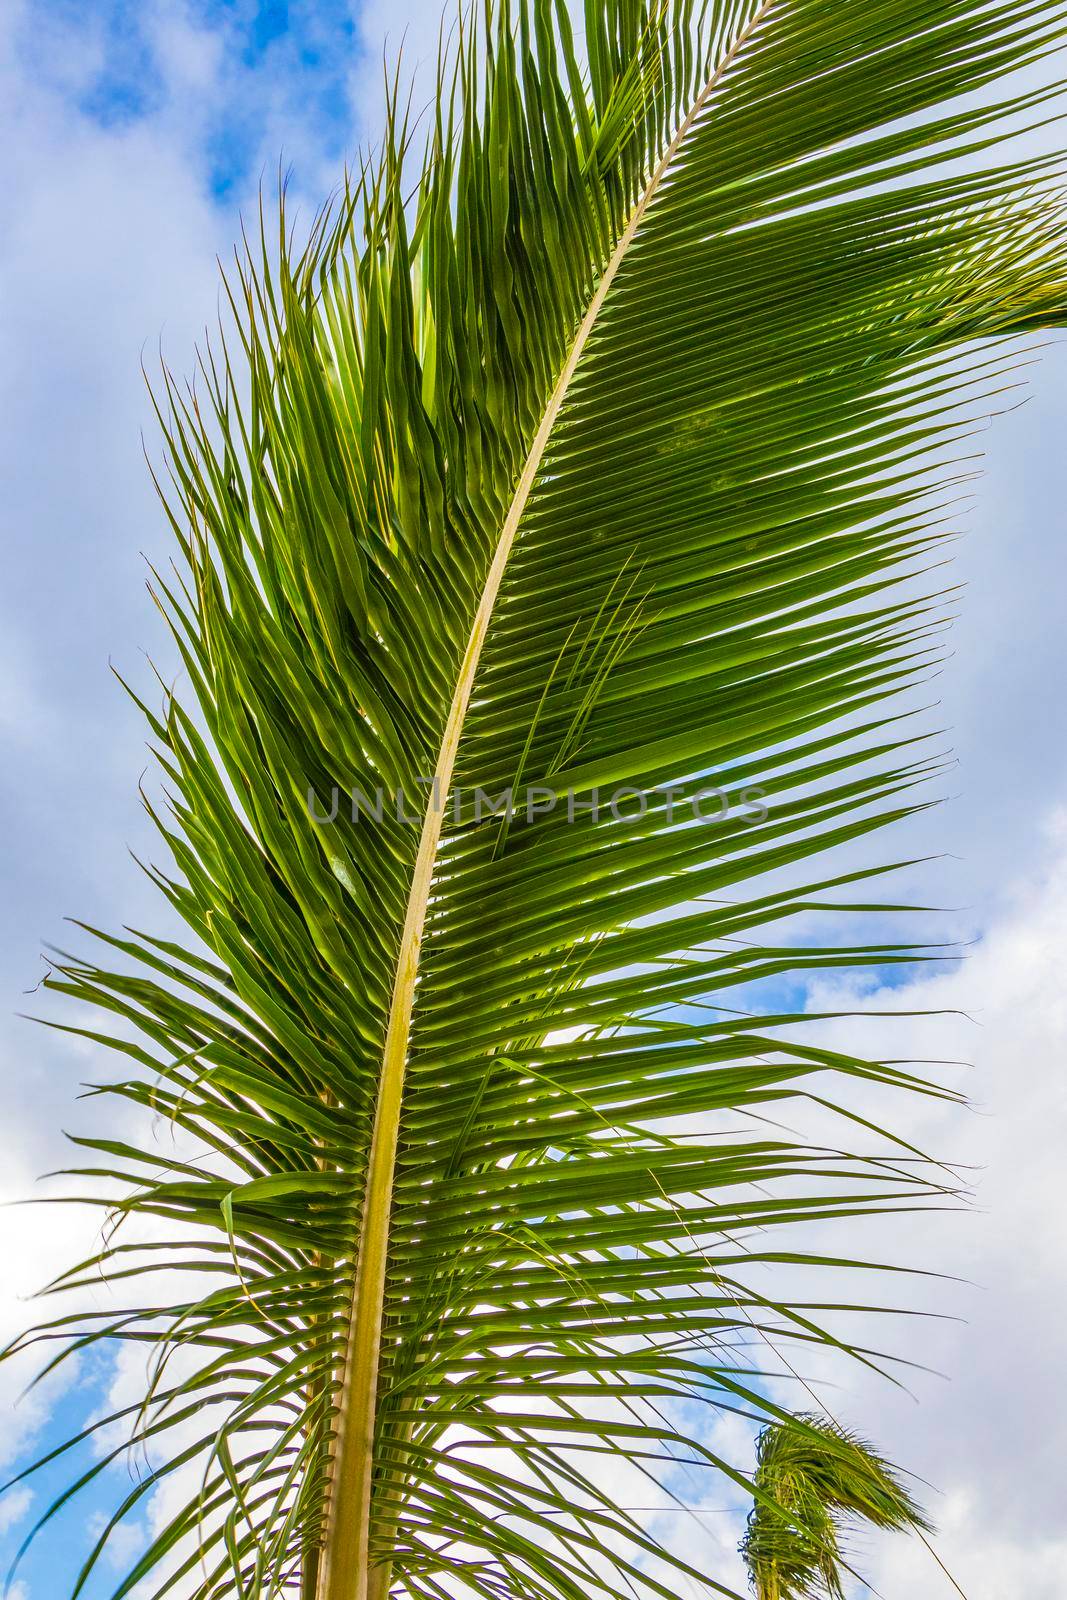 Tropical natural mexican palm tree with coconuts and blue sky background in Playa del Carmen Quintana Roo Mexico.